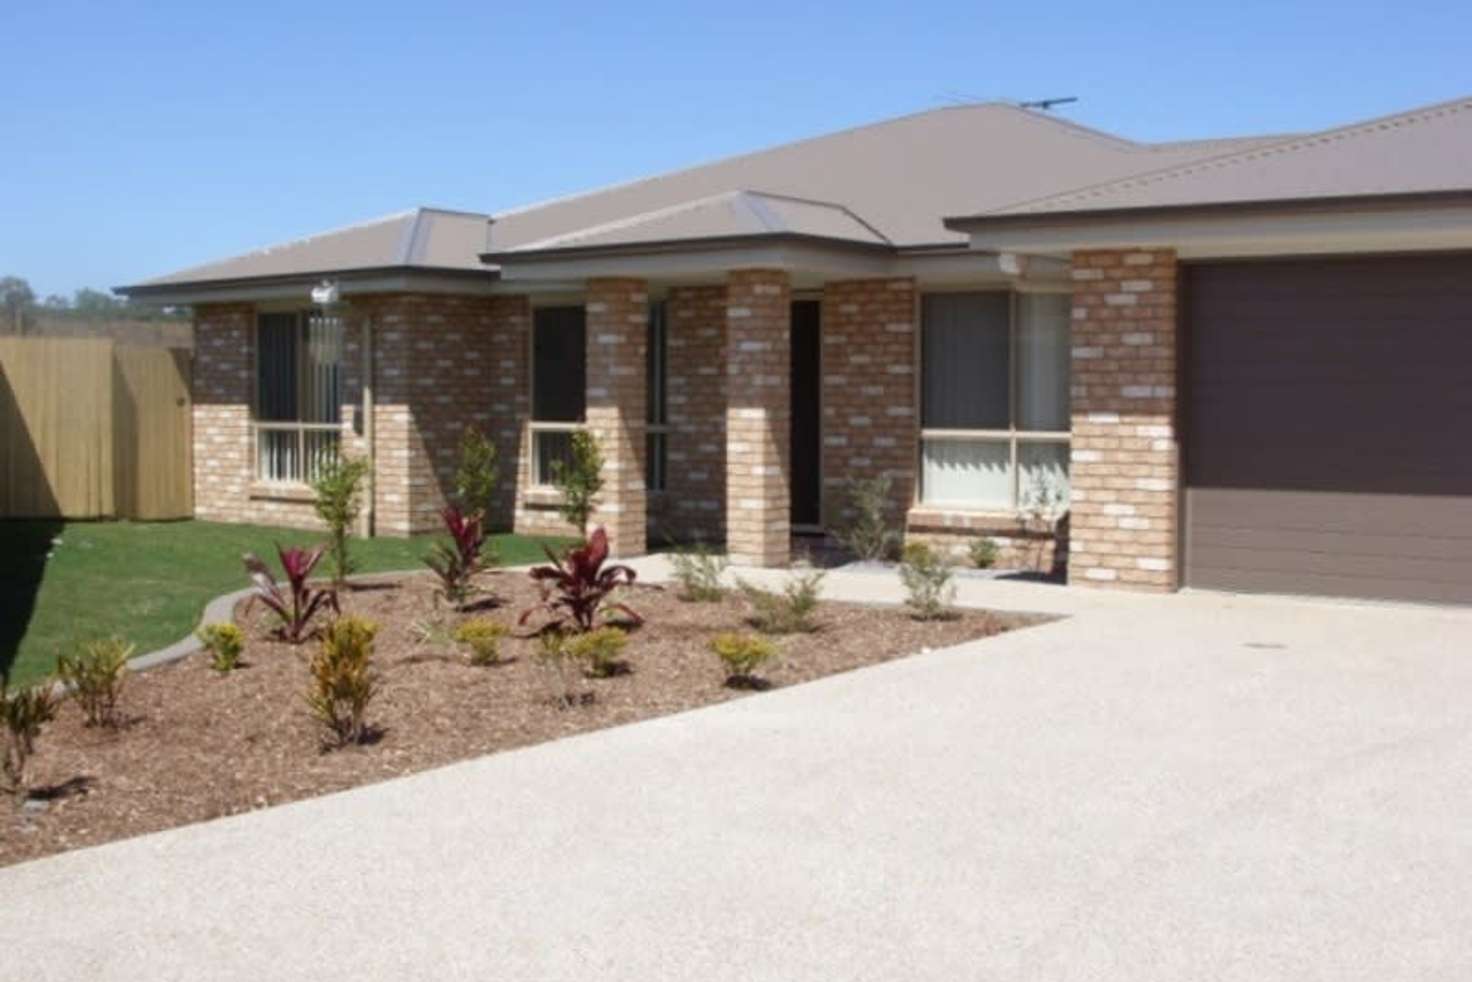 Main view of Homely house listing, 29 Trudy AVenue, Calliope QLD 4680